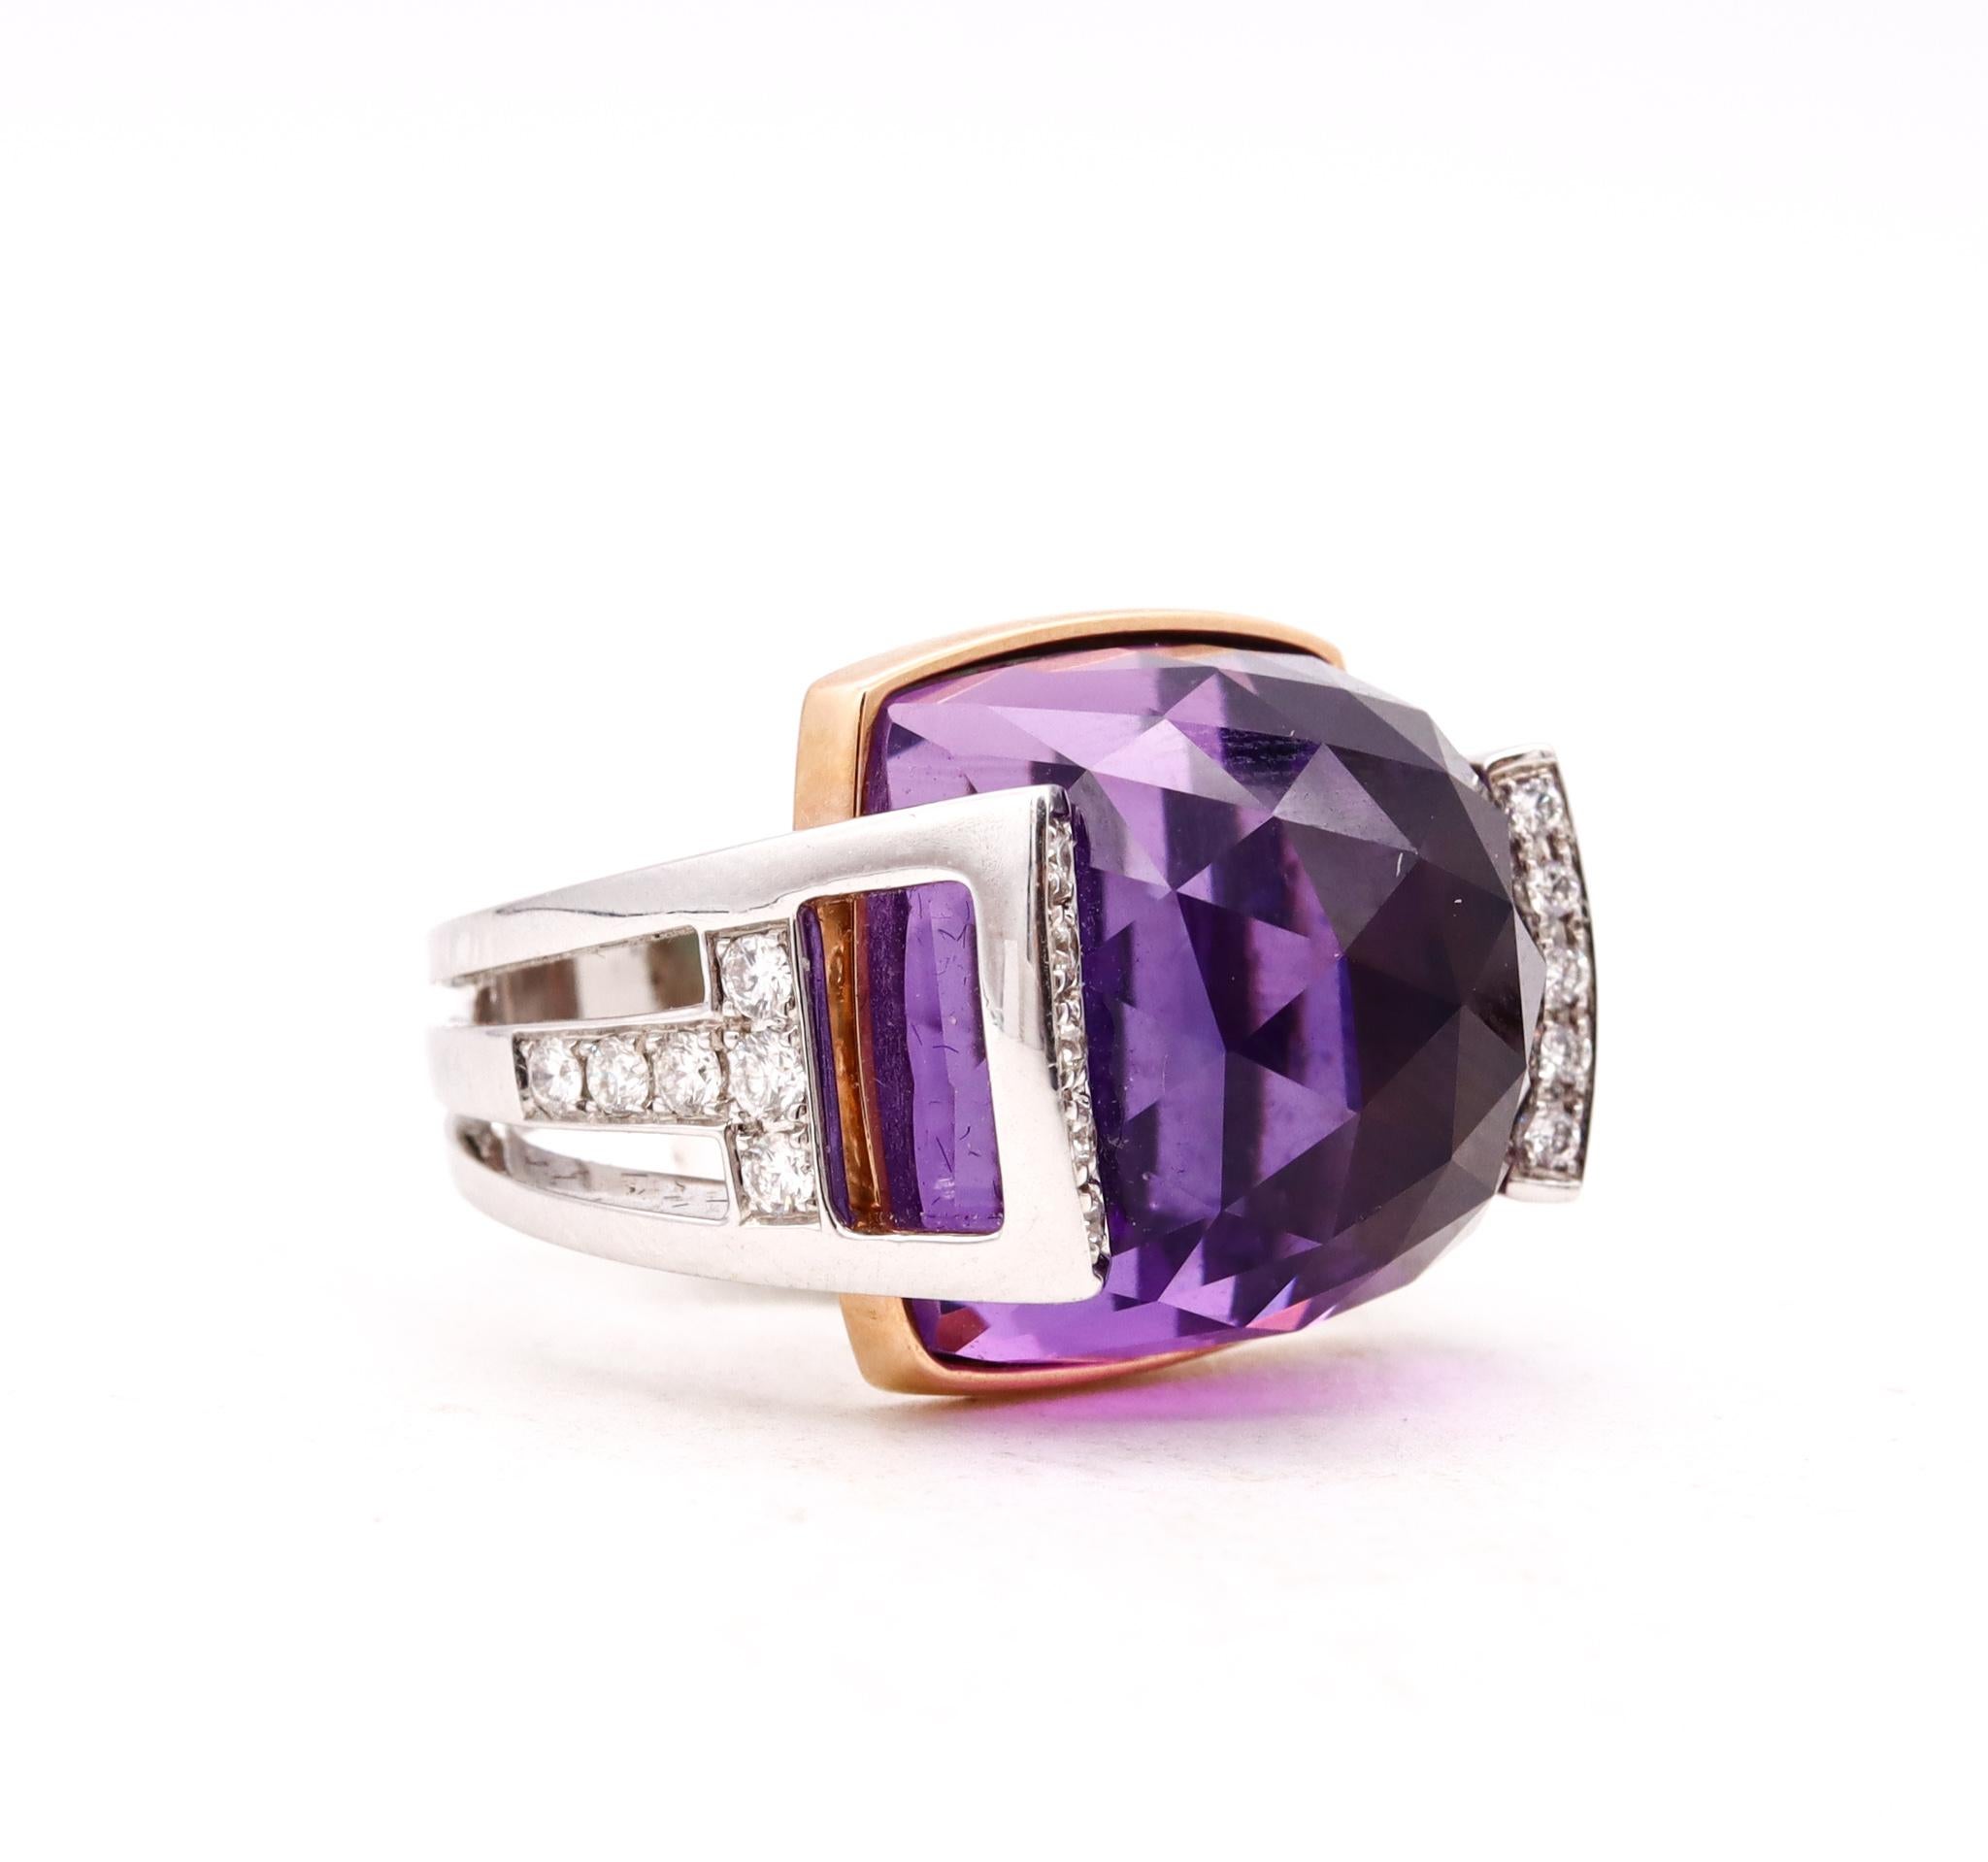 Women's or Men's Salavetti Italy Geometric Cocktail Ring 18Kt Gold 23.51 Cts Diamonds Amethyst For Sale